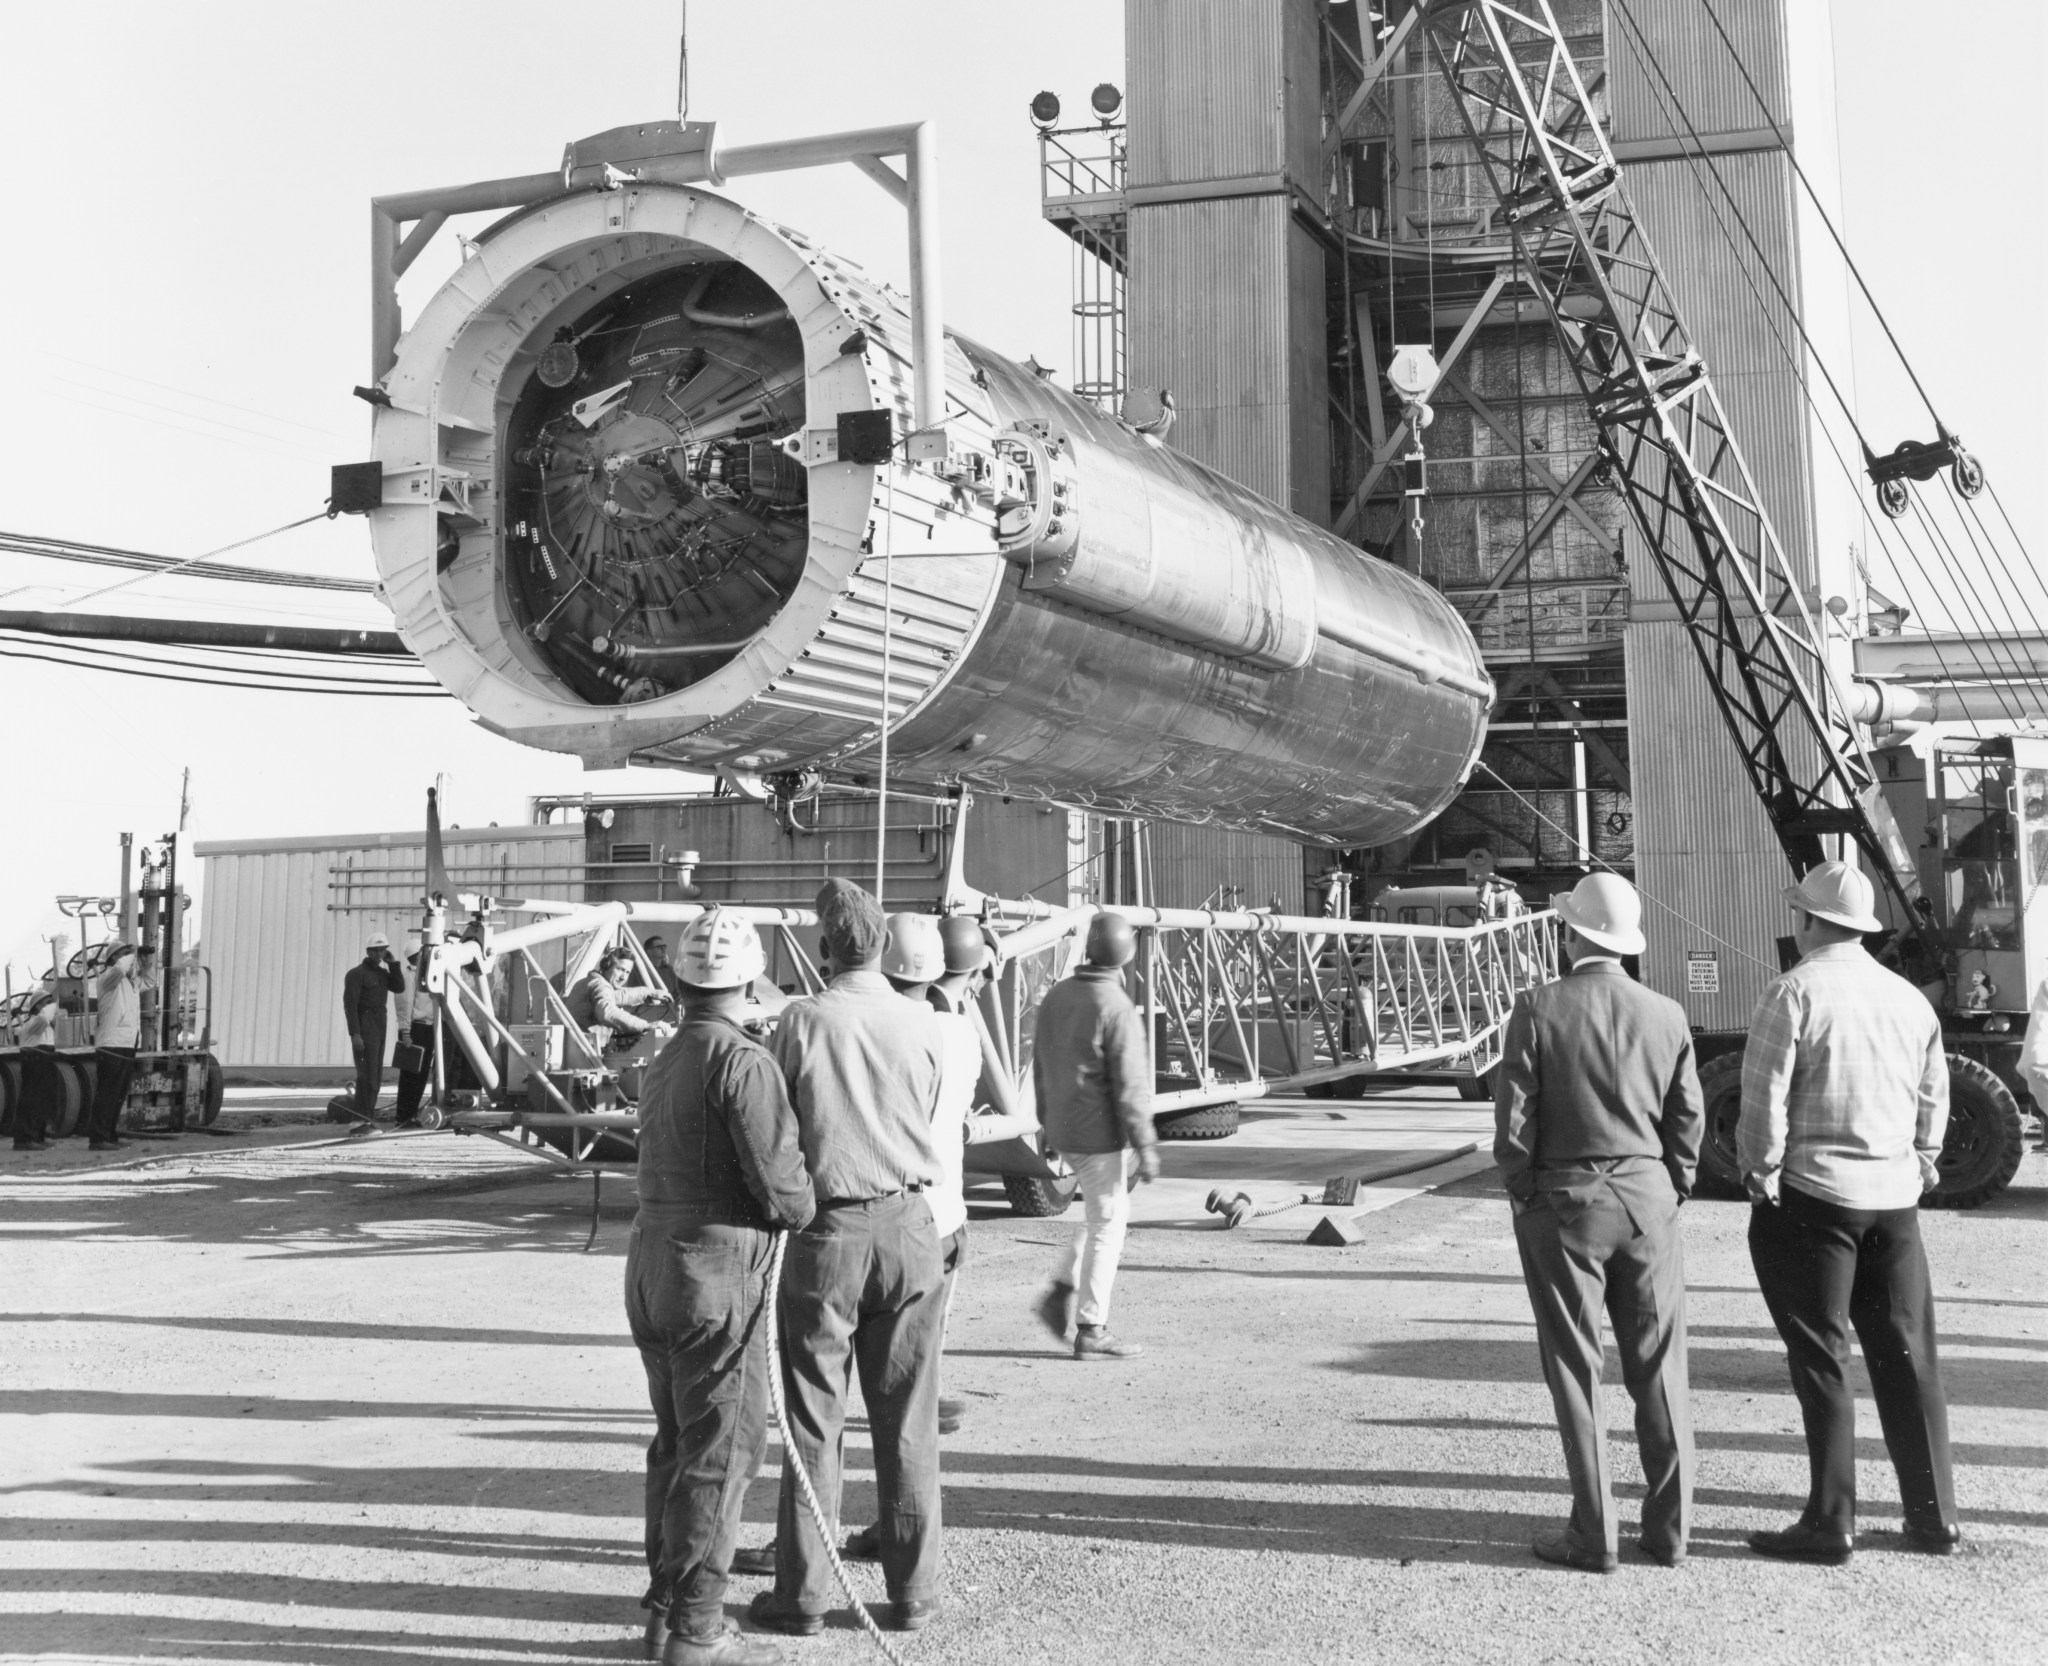 Rocket stage being lifted into tower.